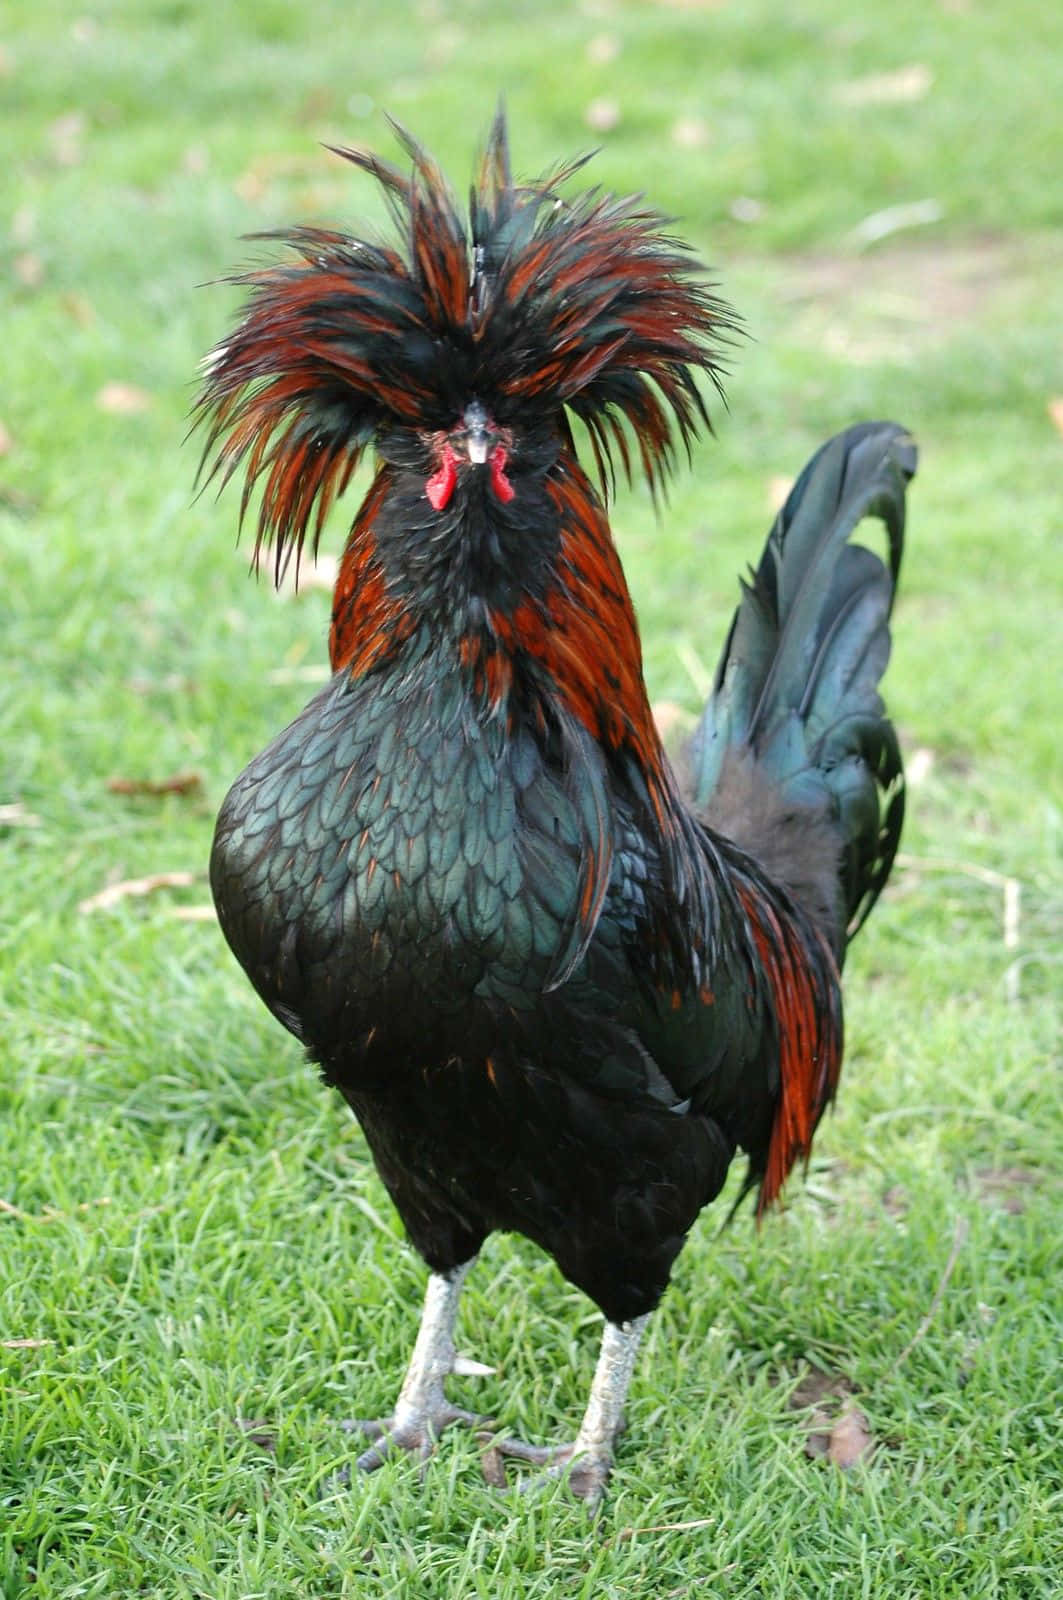 Funny Chicken Black Mohawk Feather Picture